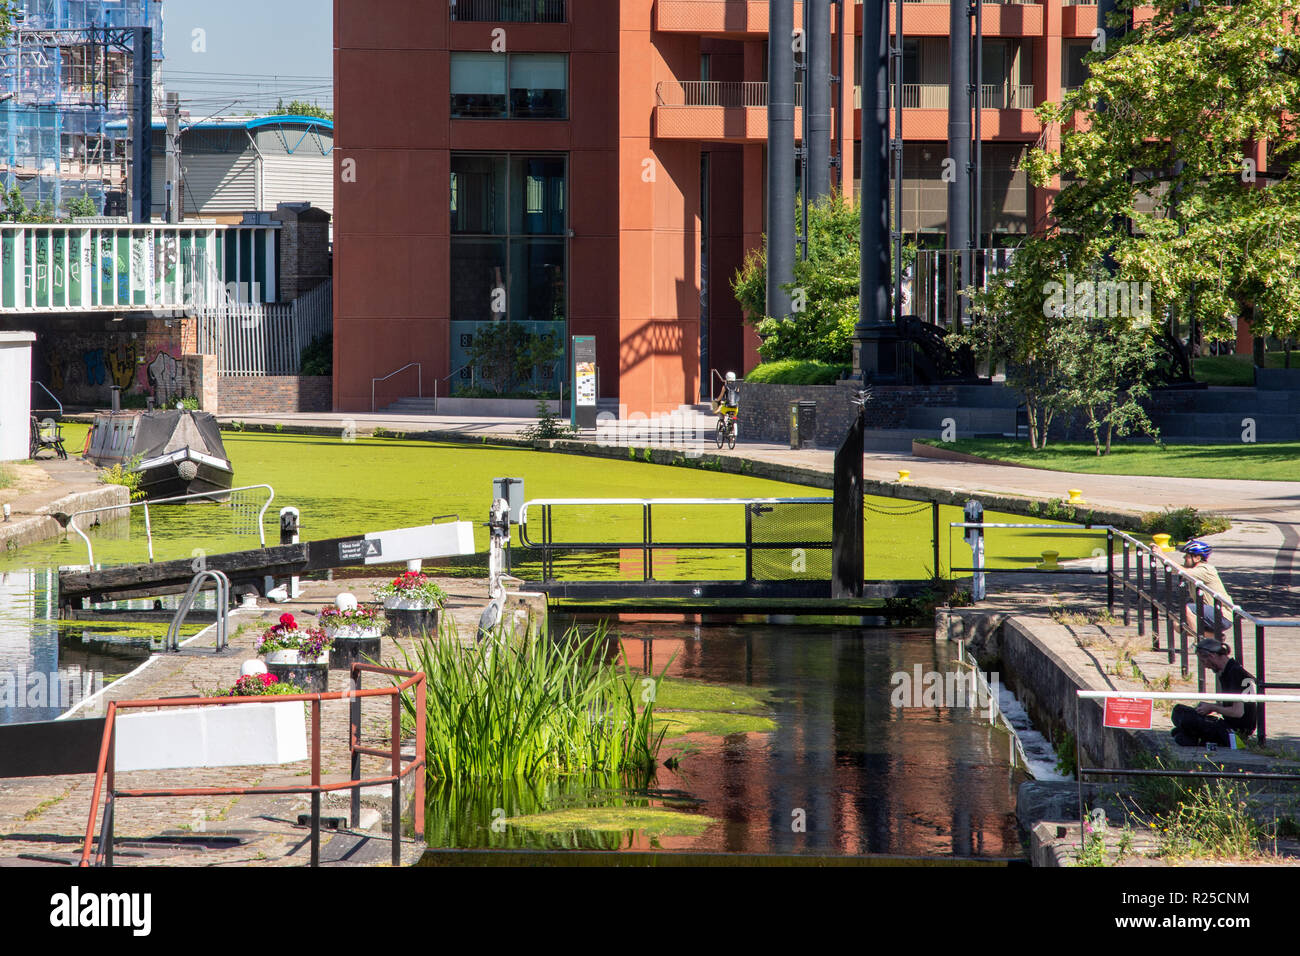 London, England, UK - June 26, 2018: A passing cyclist stops to photograph a heron at St Pancras Lock on the Regent's Canal in the King's Cross neighb Stock Photo